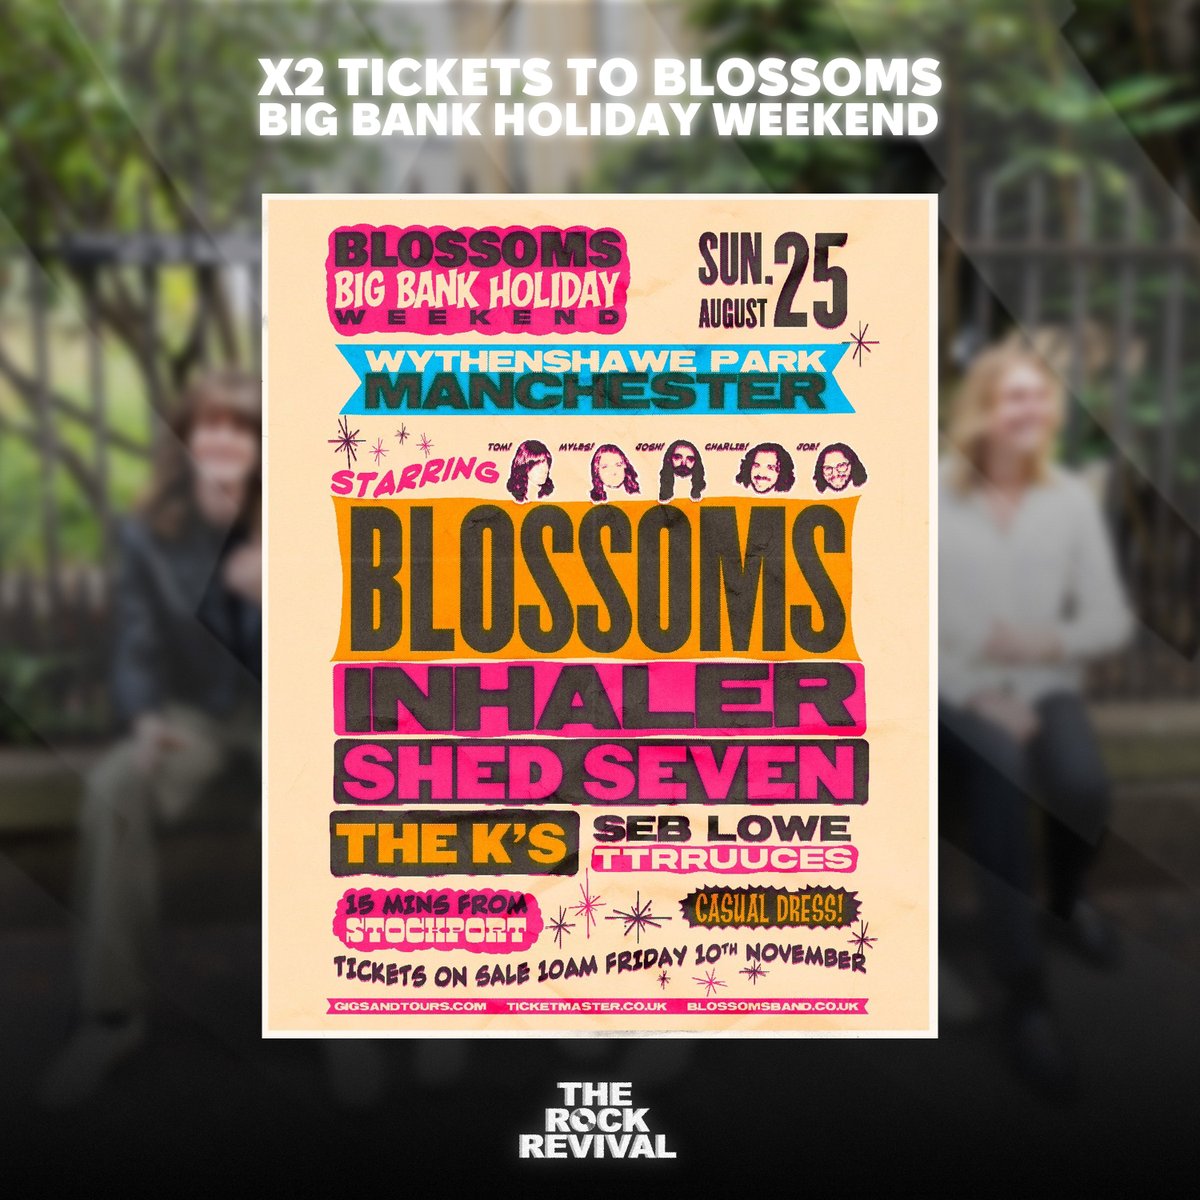 For a chance to win X2 Blossoms Big Bank Holiday Weekend tickets 🎫 

- Like and RT
- Follow @therockrevival_ & @BlossomsBand 
- Tag a mate 

P.S. Follow on Instagram for a double chance!